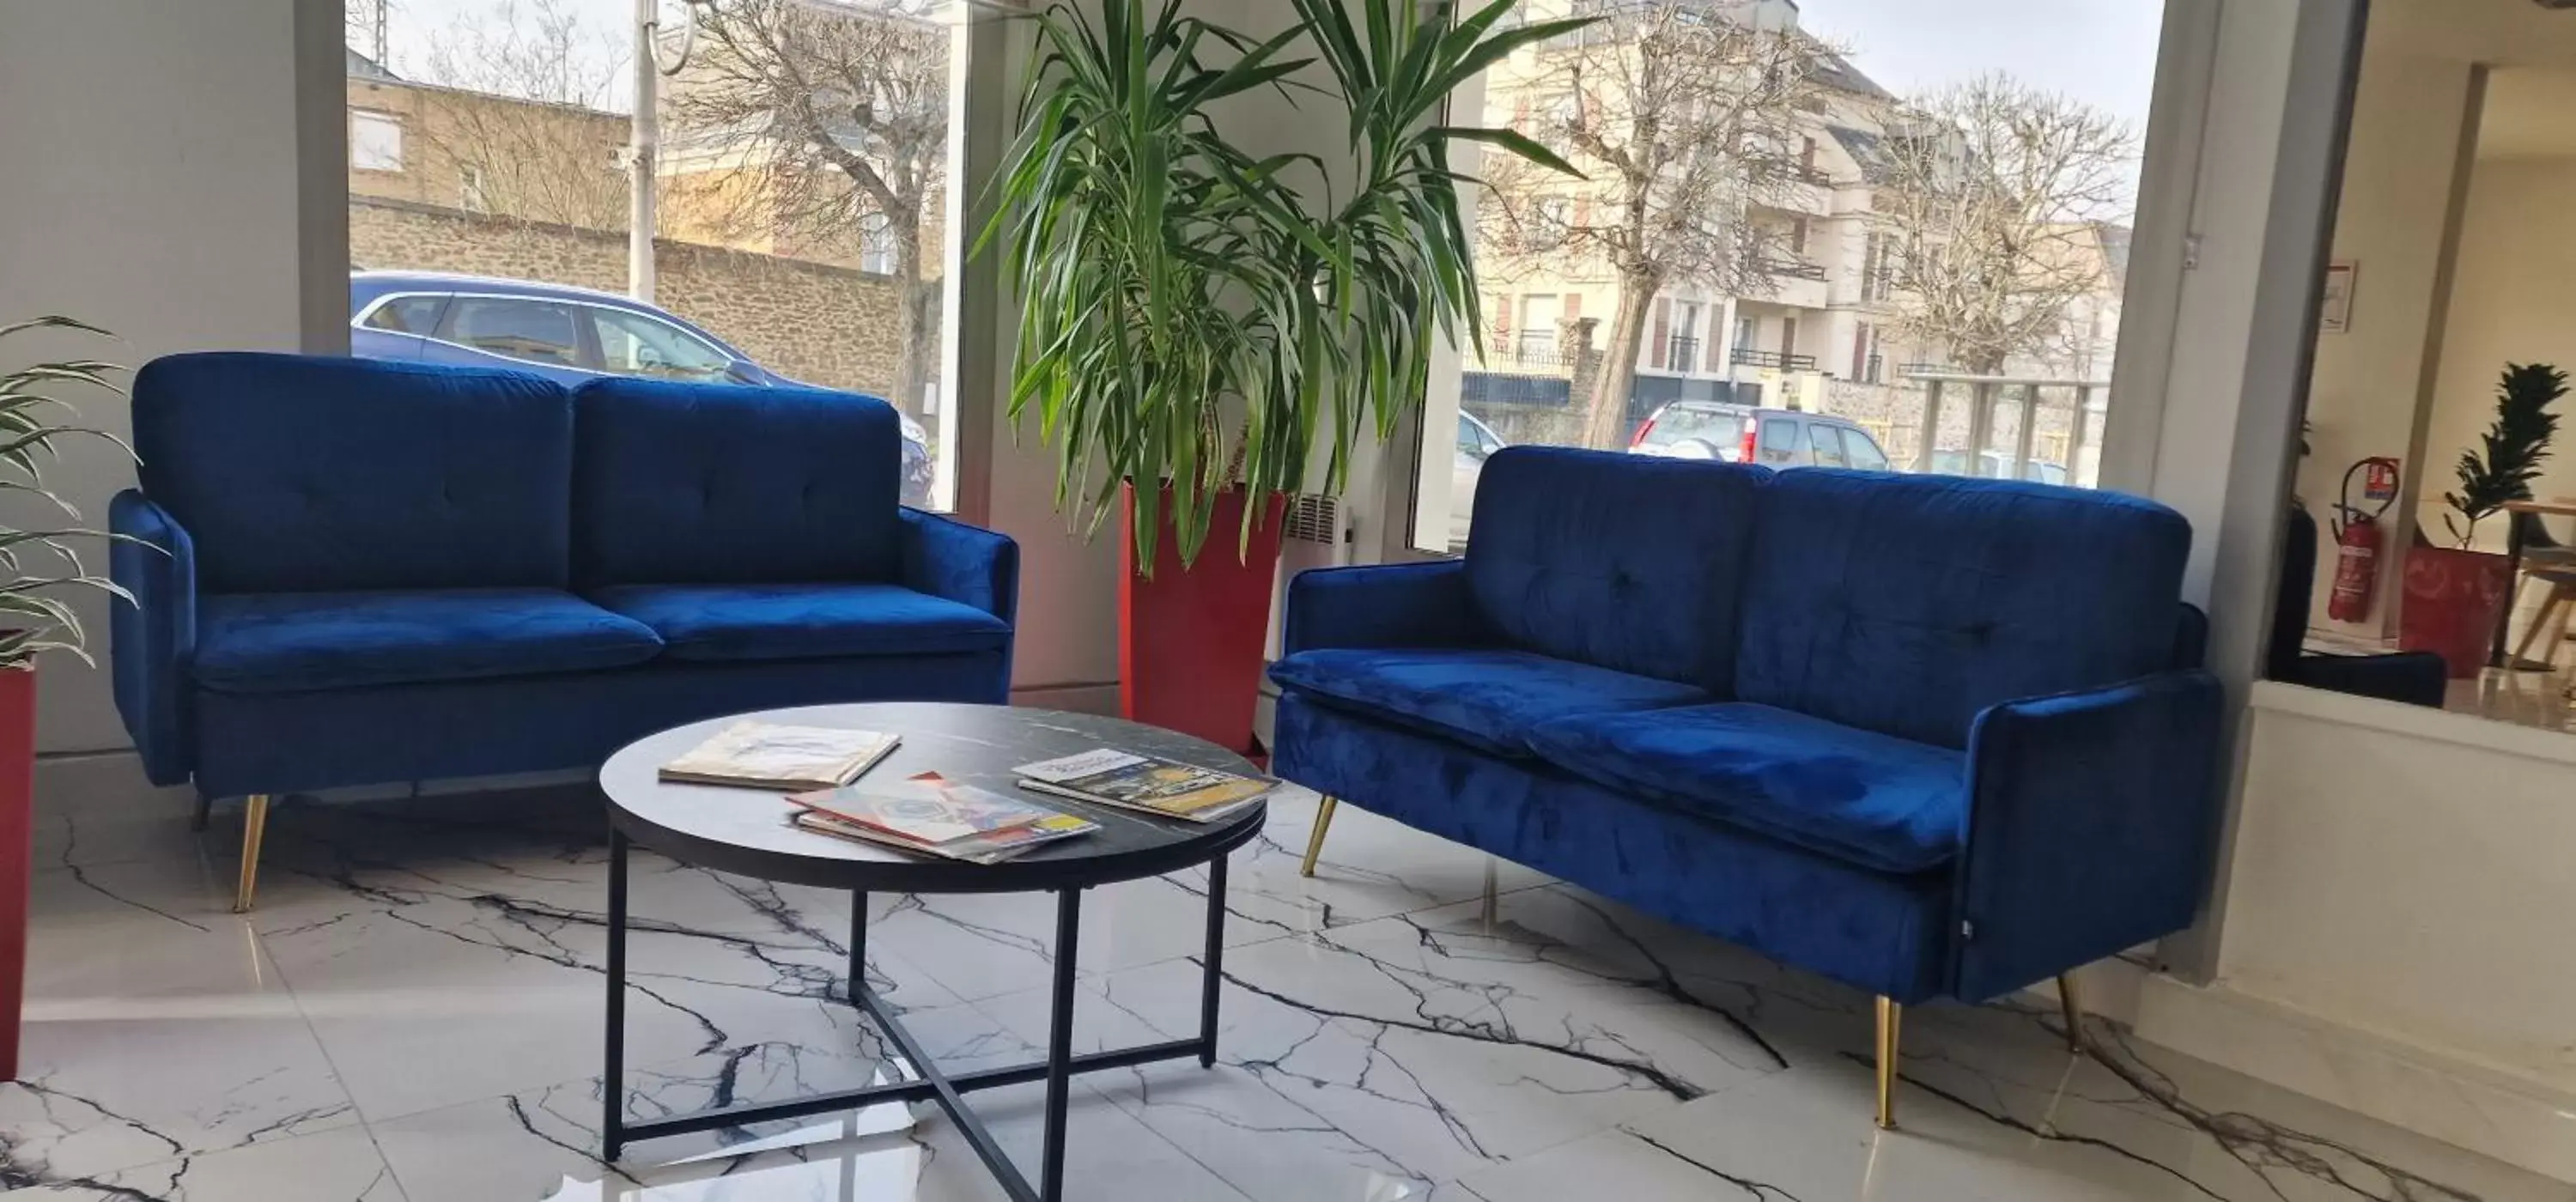 Seating Area in Kyriad Direct Arpajon